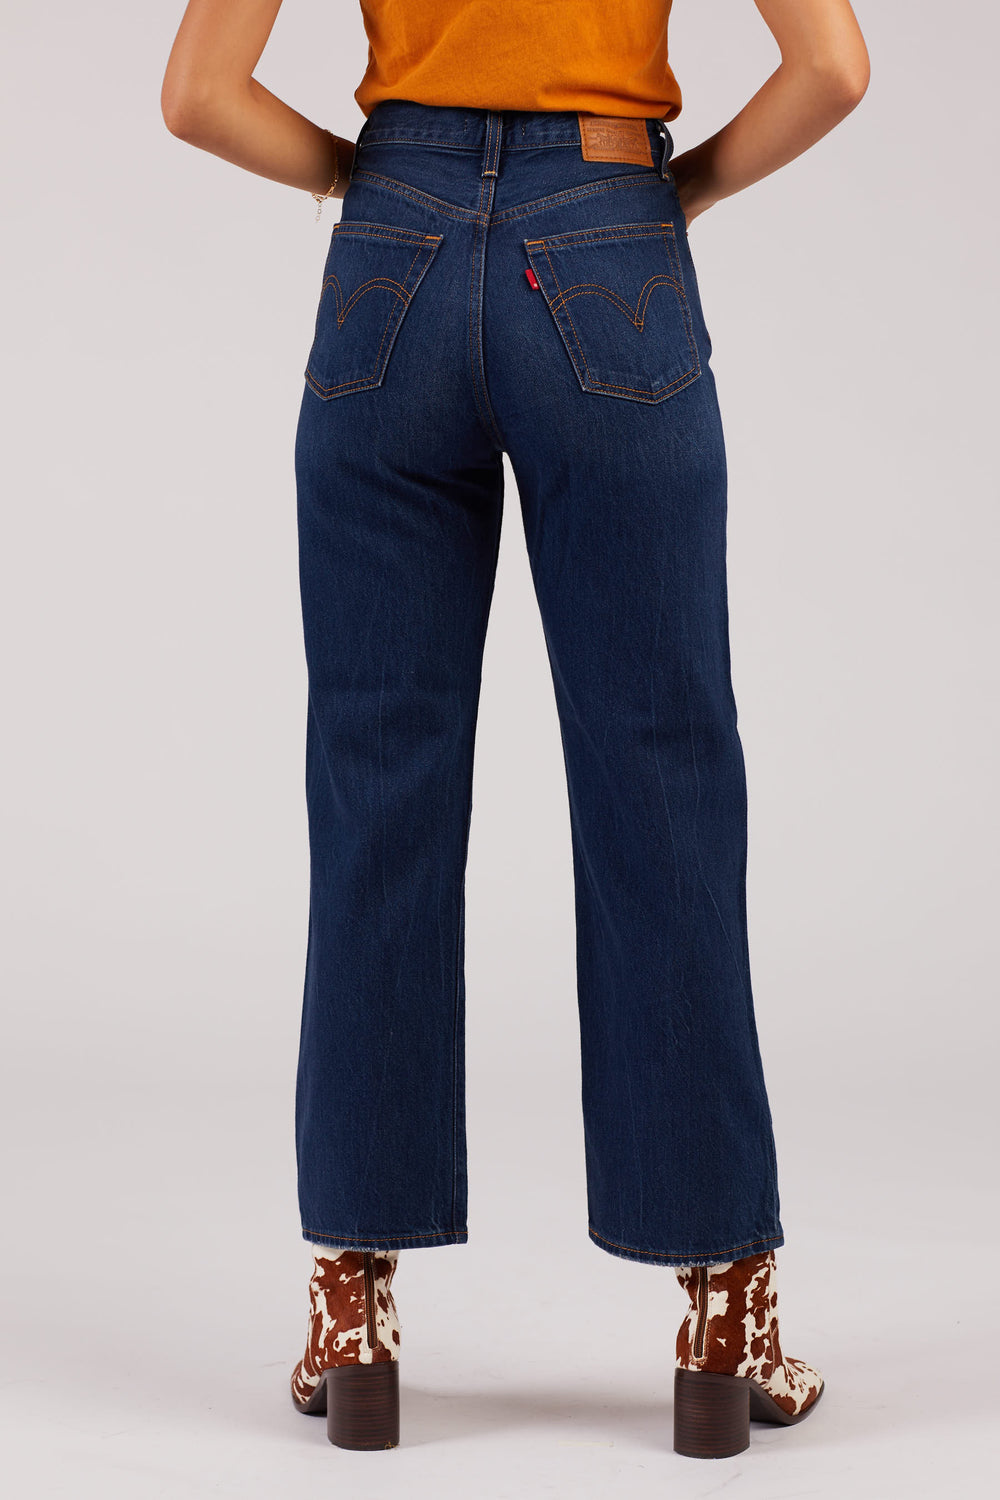 Standing Steady Ribcage Straight Jeans